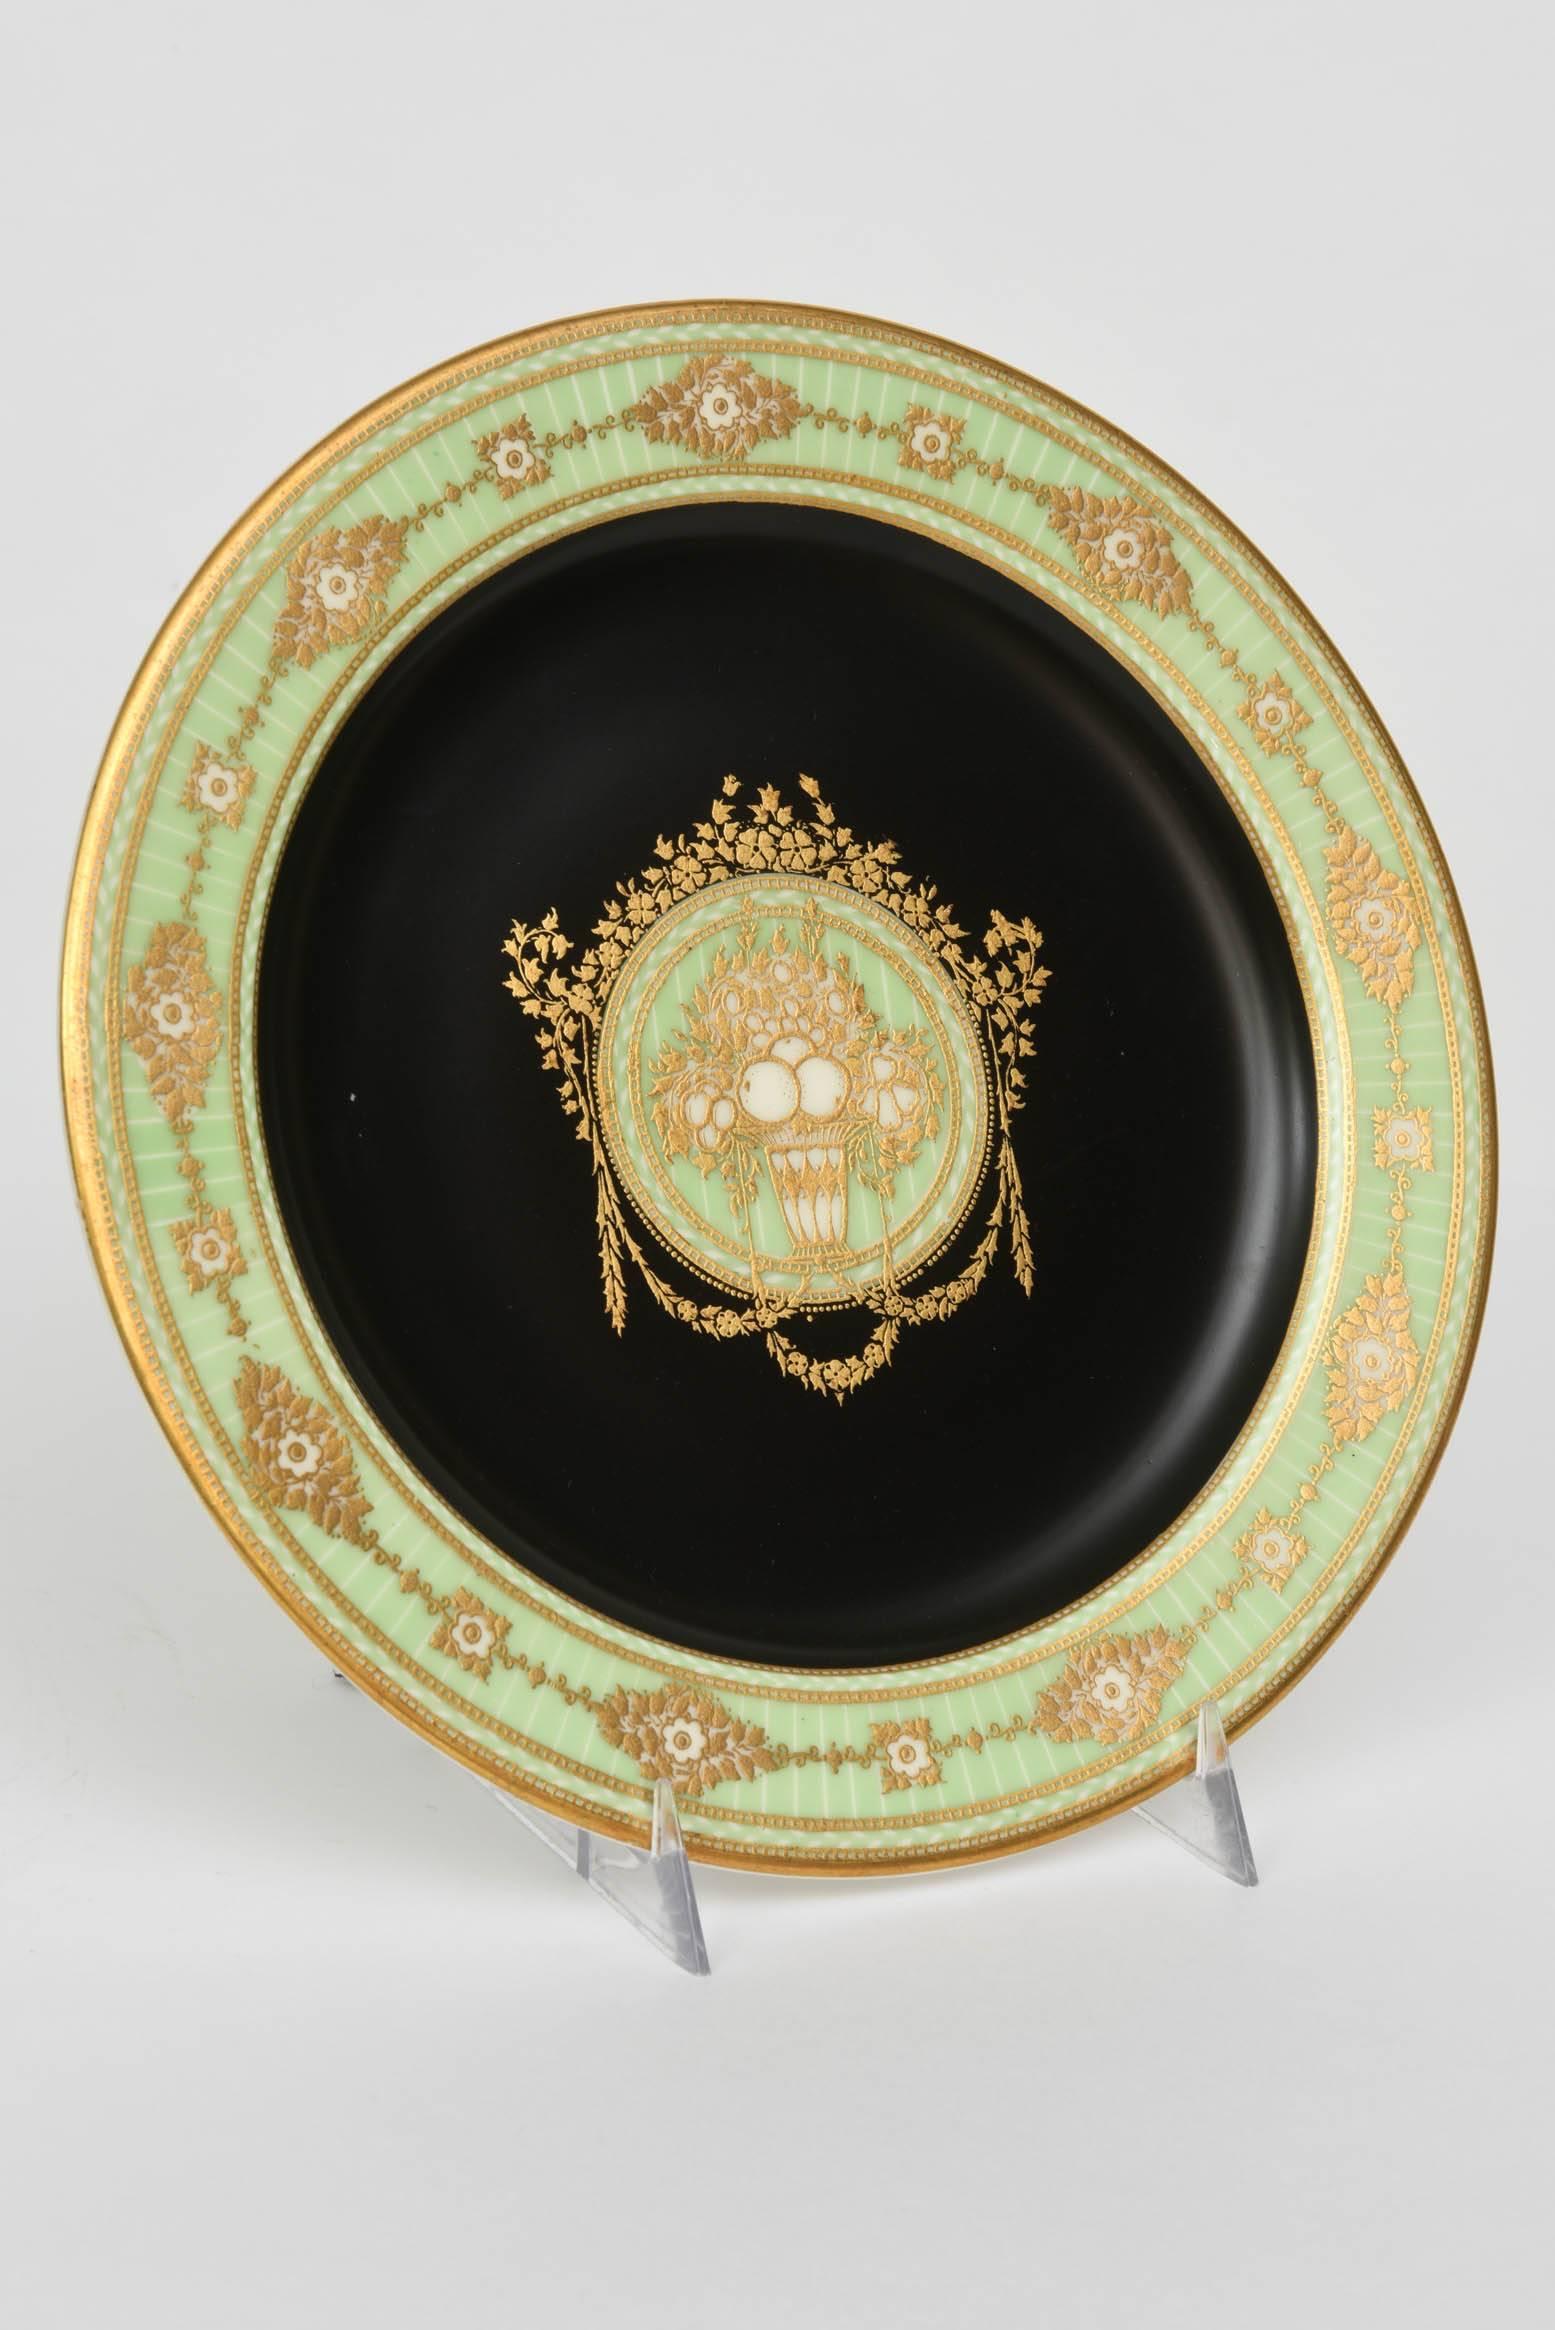 Hand-Crafted 12 Antique Green and Black Rare Unique Embossed Gilt Dessert or Cabinet Plates